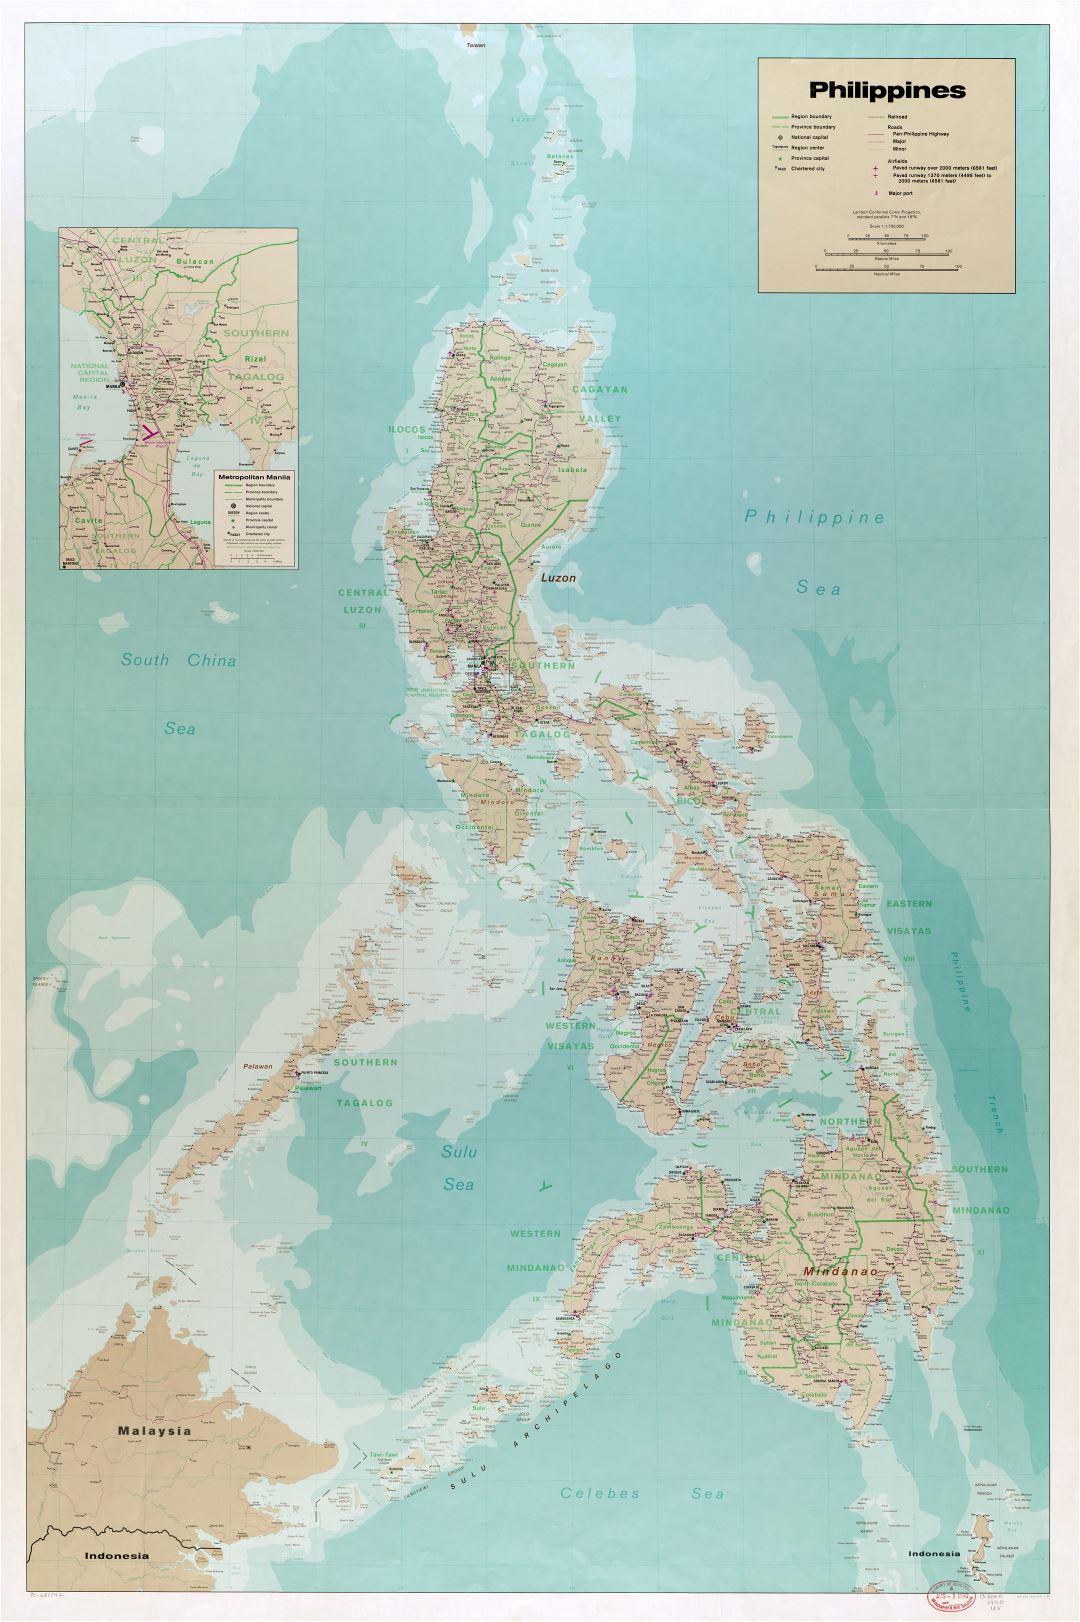 Large scale detailed political and administrative map of Philippines with roads, railroads, all cities, airports, ports and other marks - 1990